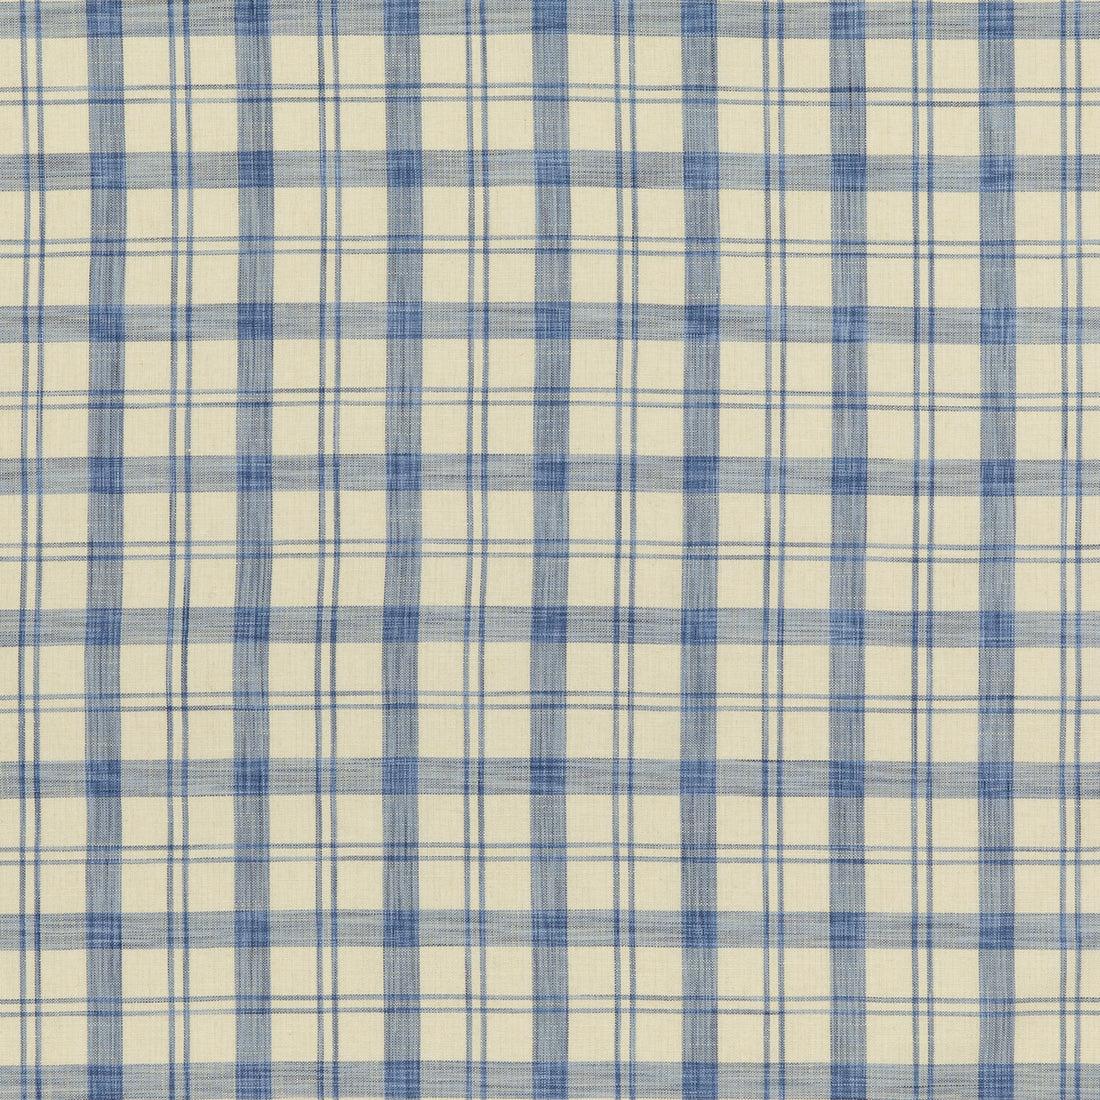 Barbery Check fabric in blue color - pattern 8019103.5.0 - by Brunschwig &amp; Fils in the Normant Checks And Stripes collection